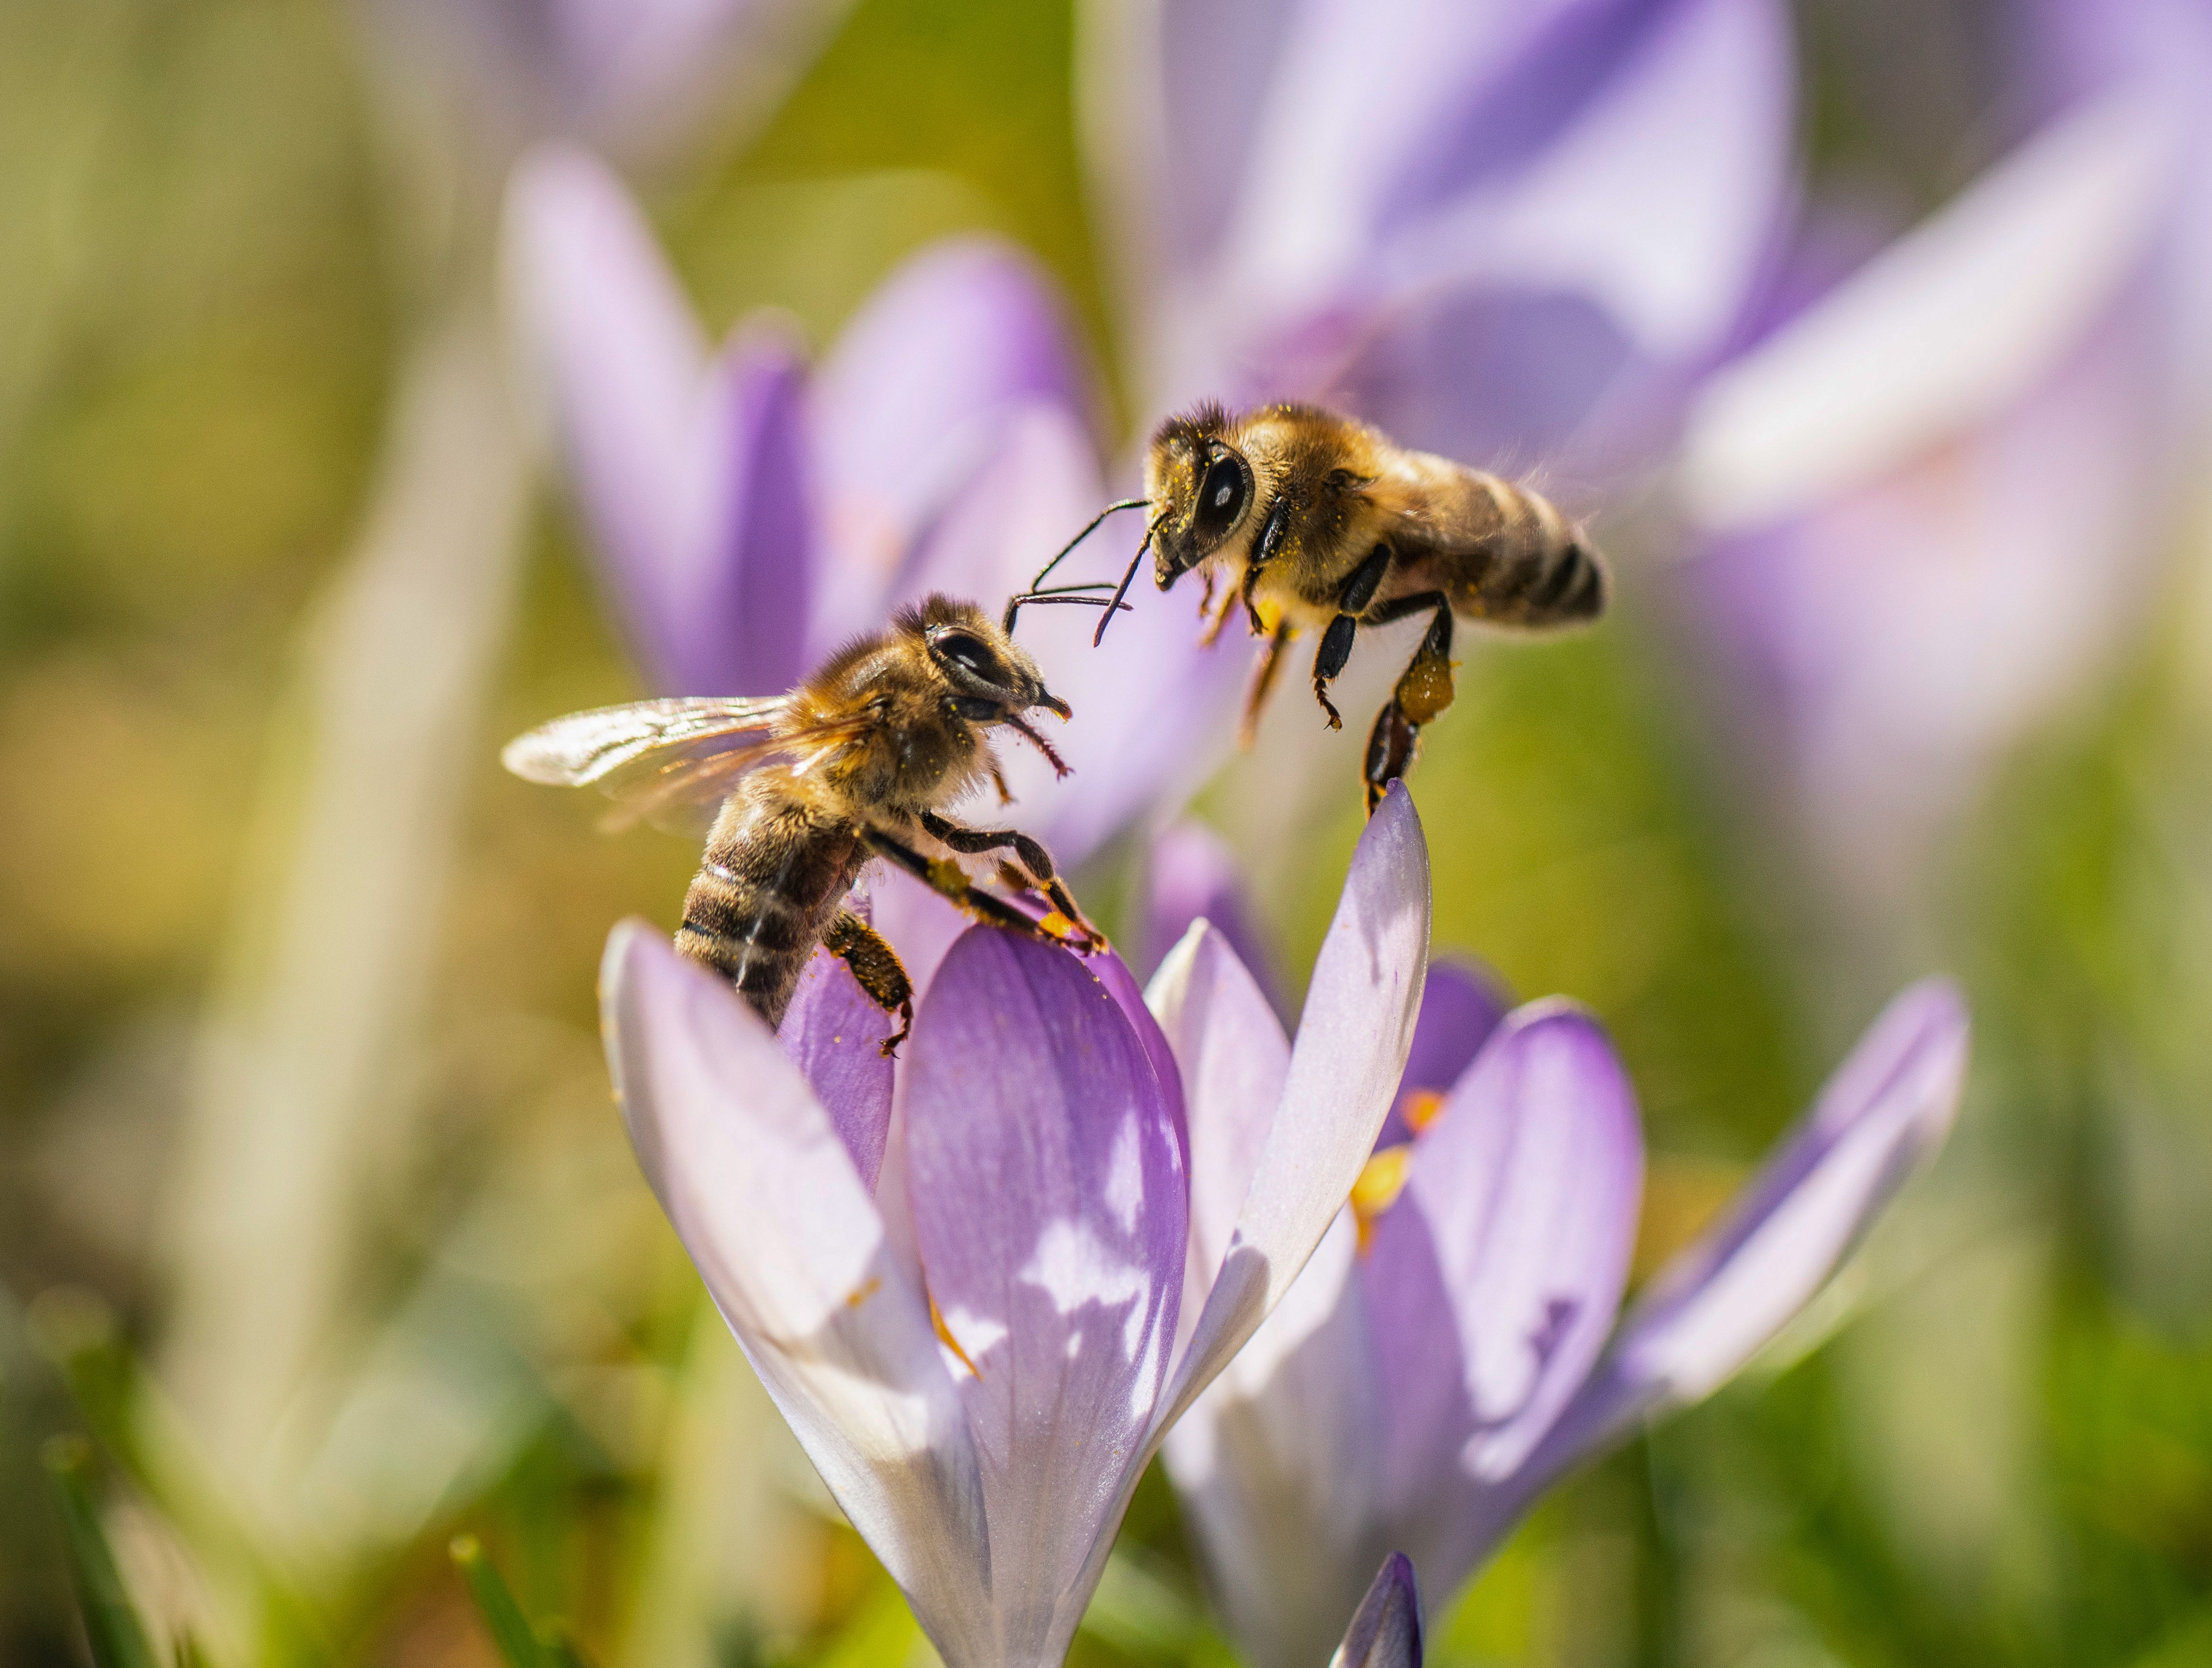 Two bees rest on a crocus on February 18, 2019 in Frankfurt am Main, western Germany. (Photo by Frank Rumpenhorst / dpa / AFP) / Germany OUT(Photo credit should read FRANK RUMPENHORST/AFP/Get